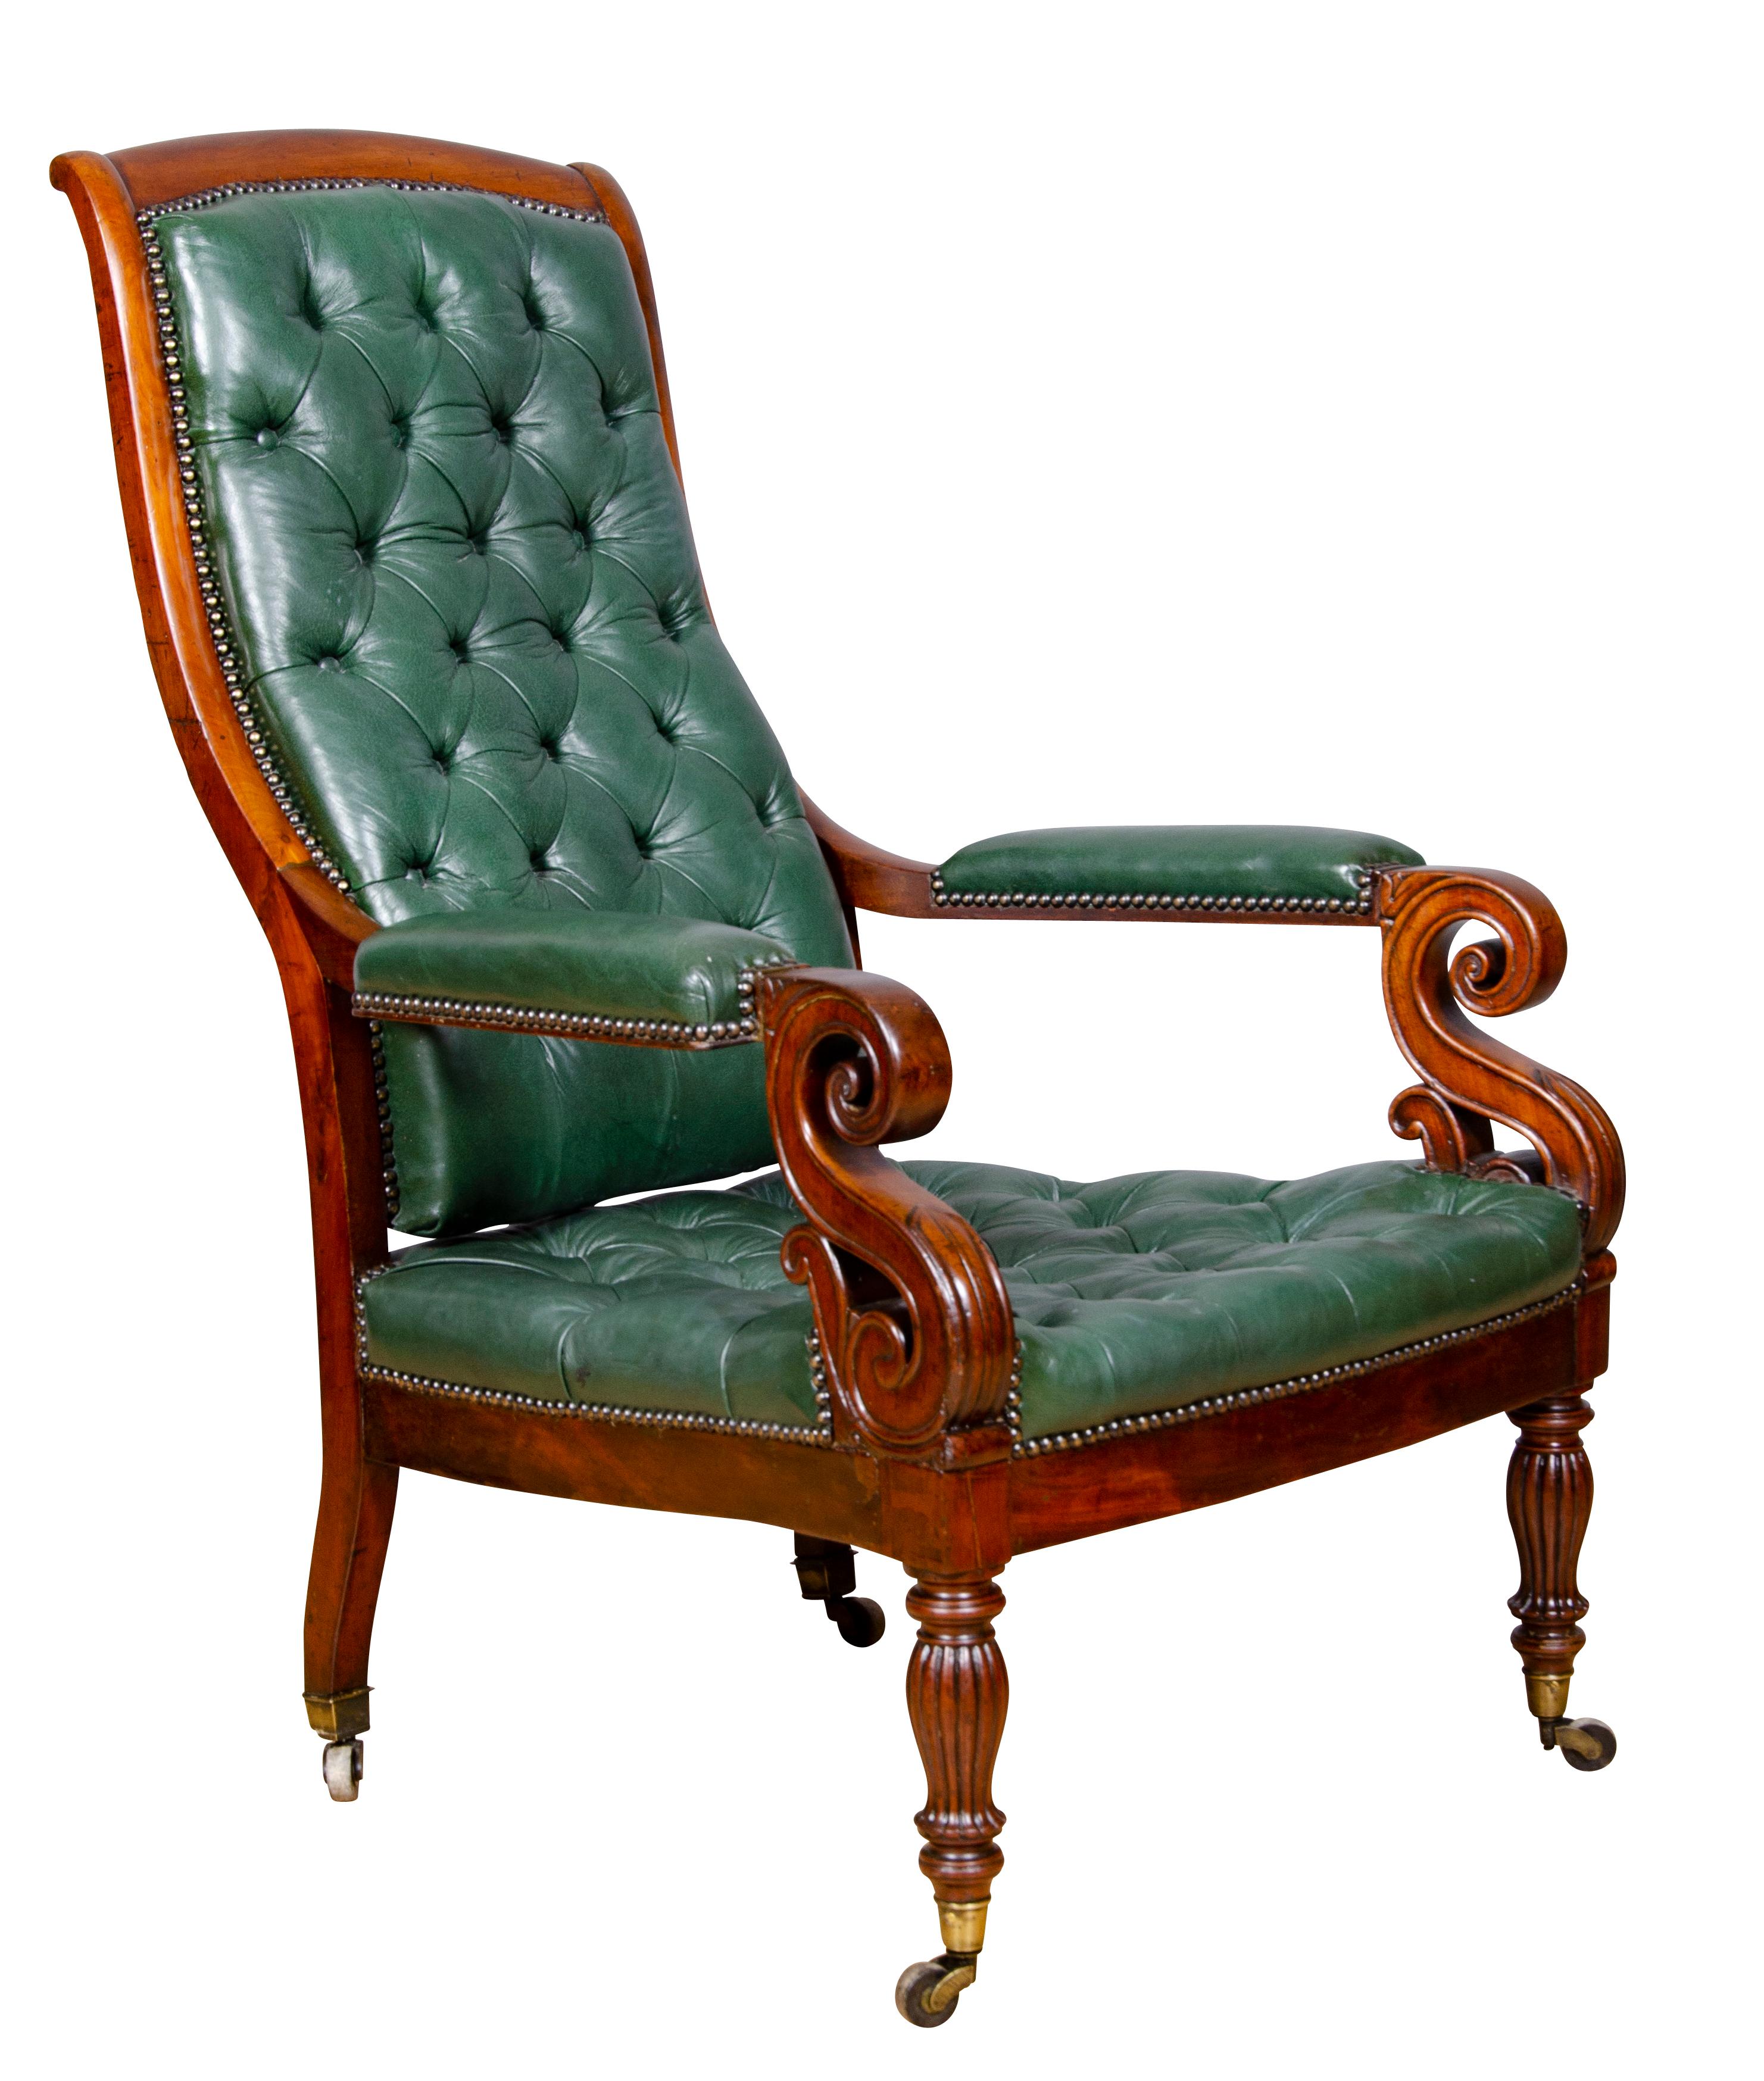 With slightly arched tufted green leather back and matching seat, the handsomely scrolled arms with carved leaf detail, raised on reeded tapered legs and casters.